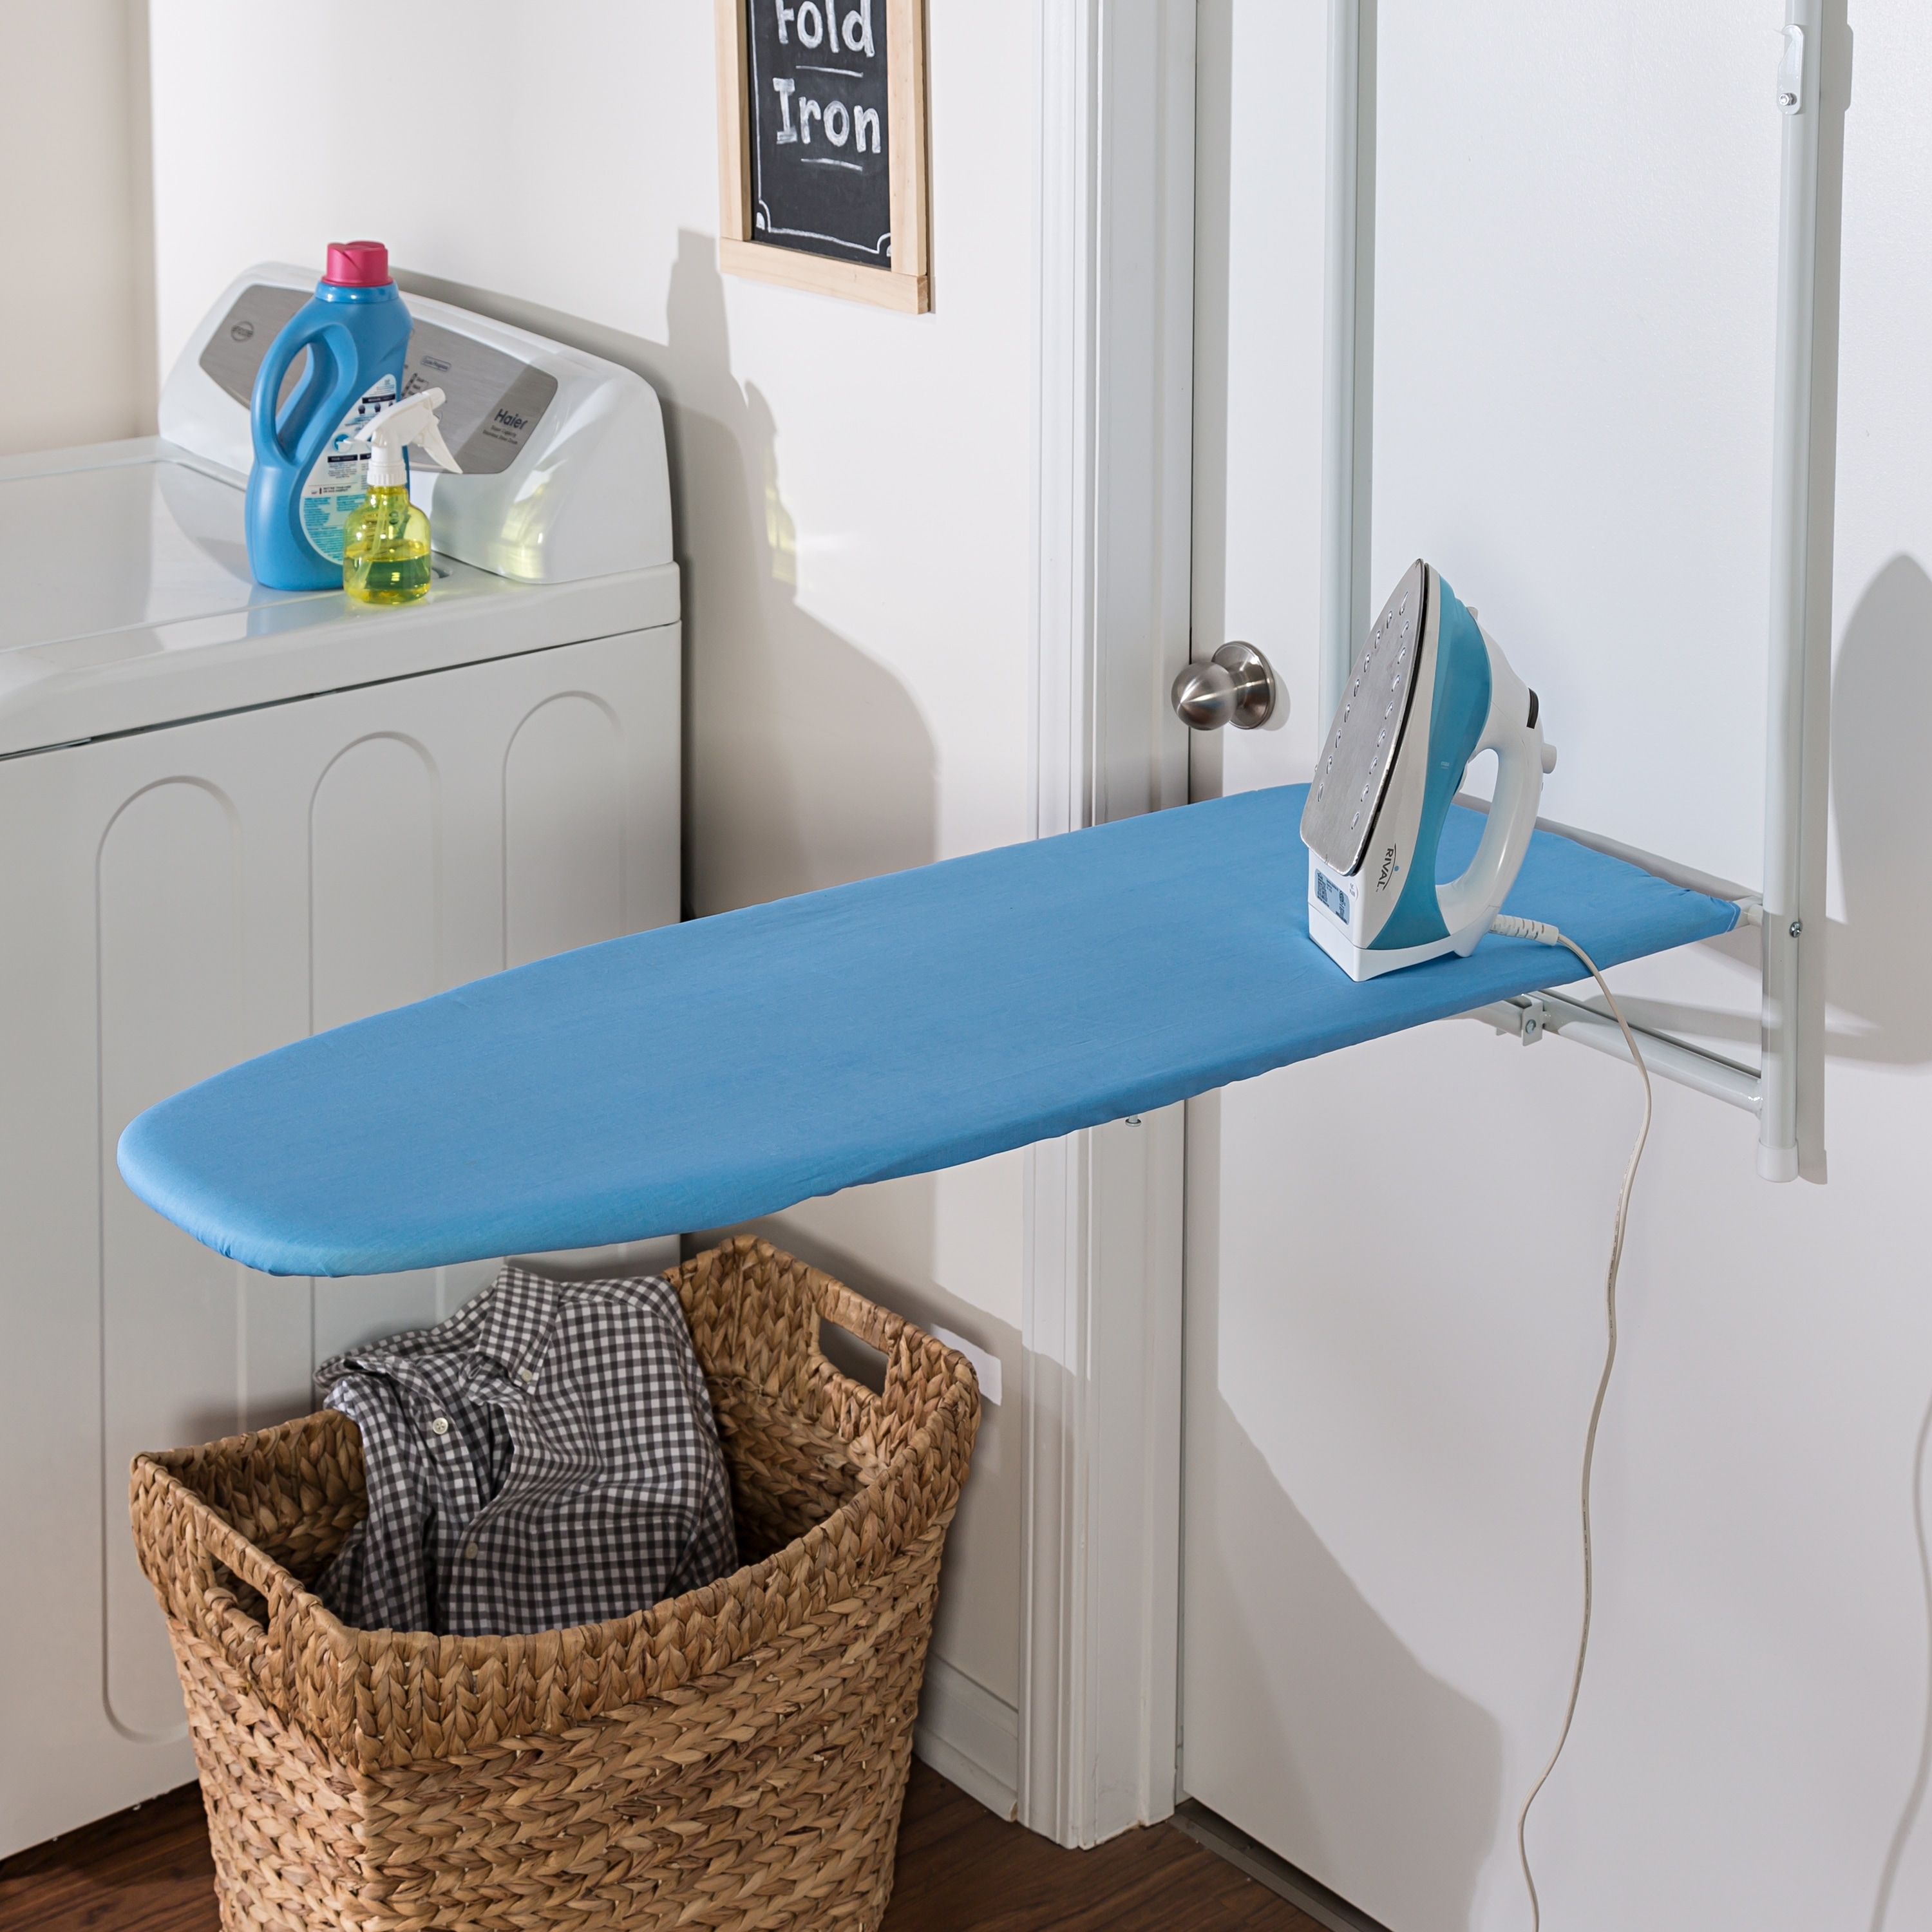 the hanging ironing board